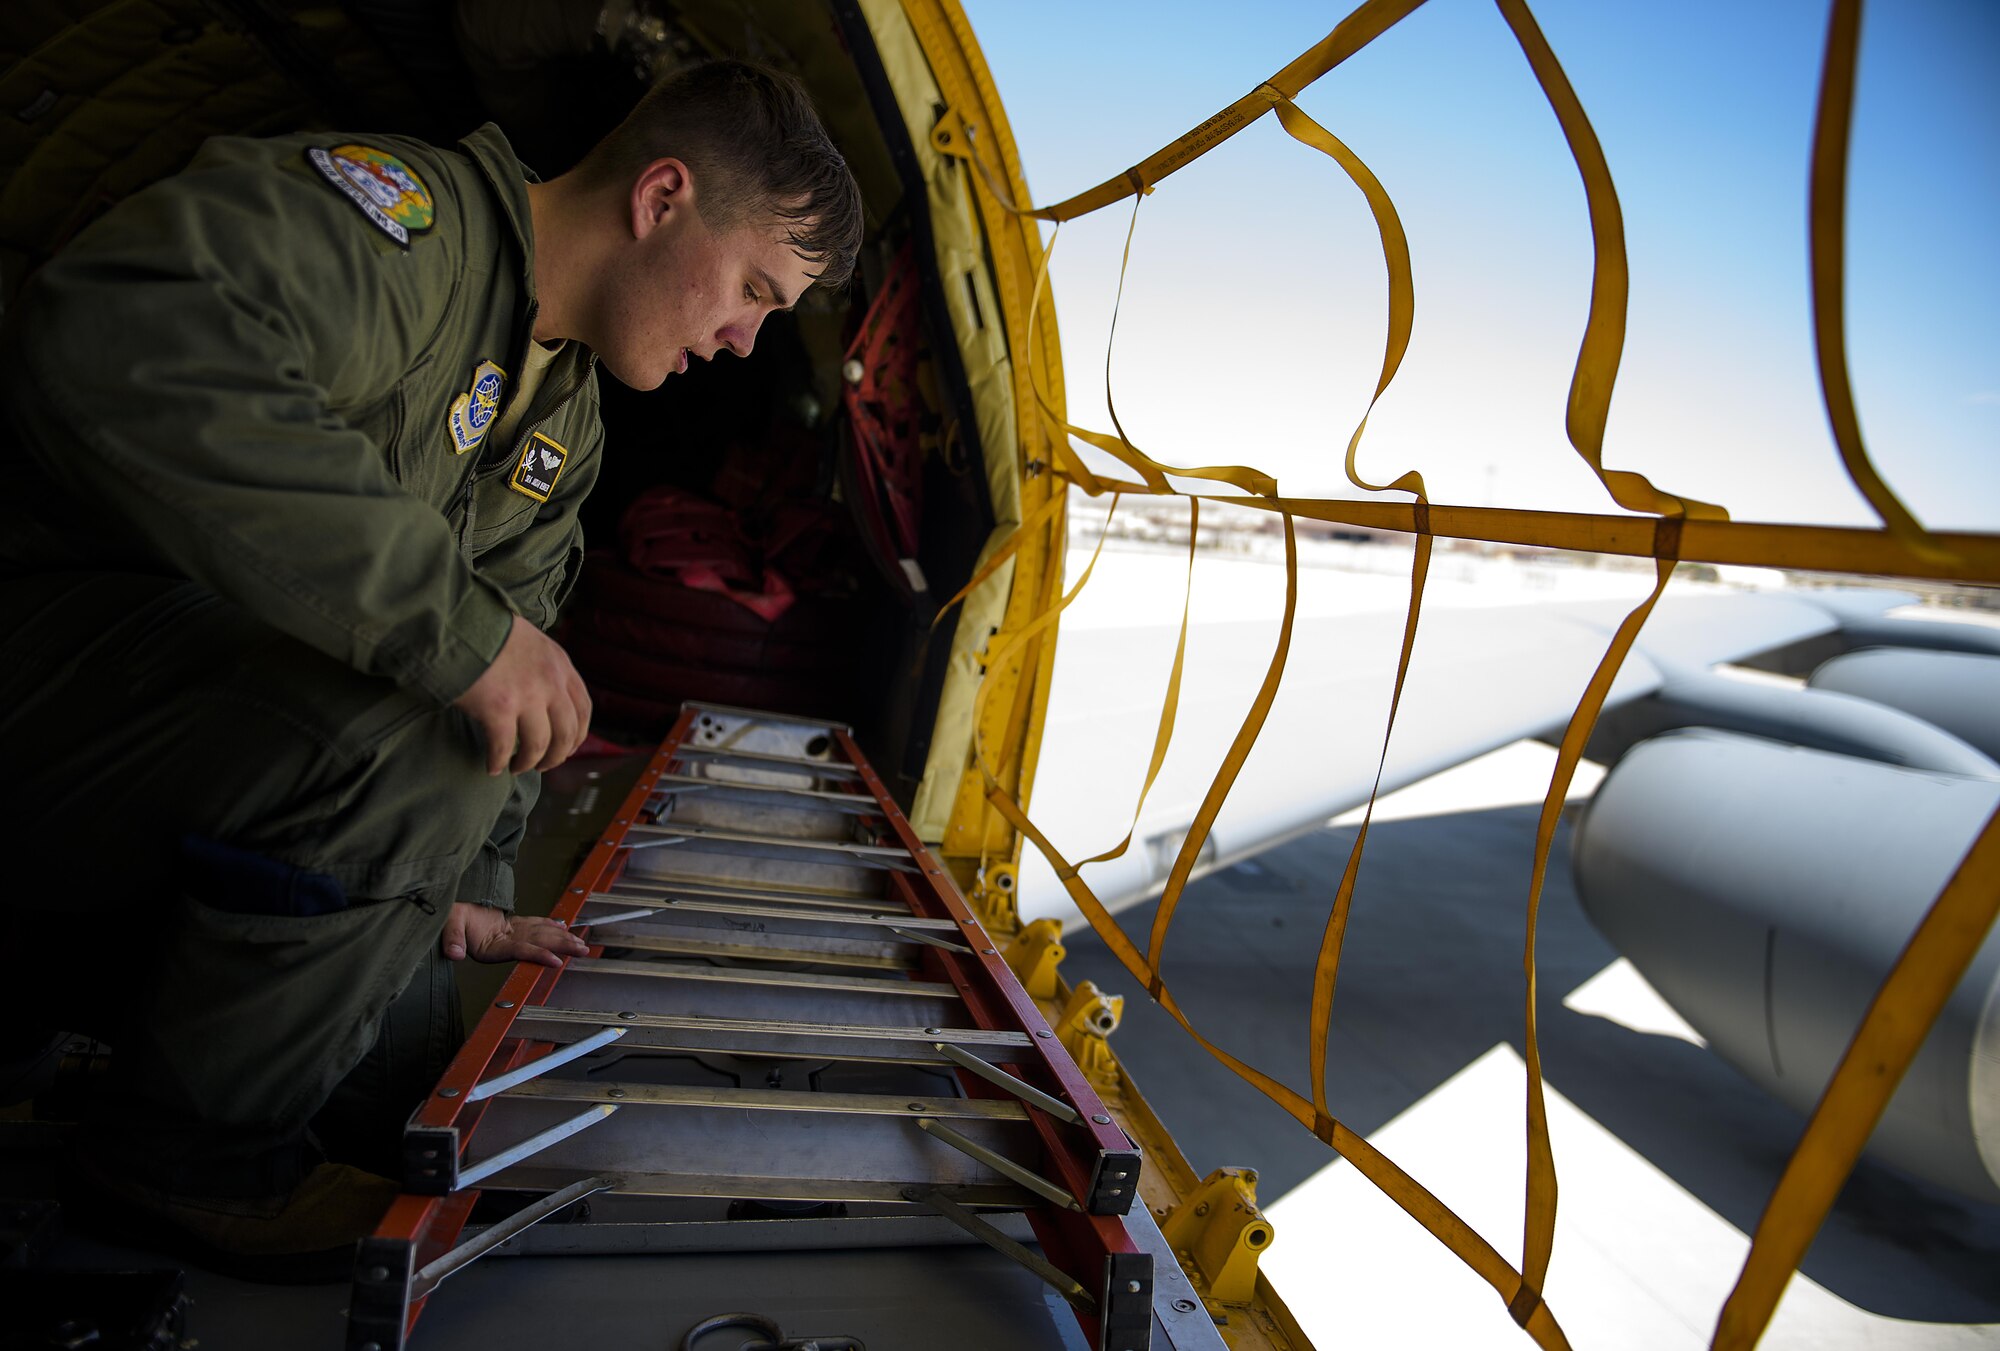 Senior Airman Jordan Webber, a KC-135 Stratotanker boom operator from MacDill Air Force Base, double checks gear is where it needs to be shortly before an refueling mission at Nellis Air Force Base, Nevada July 18, 2015 during exercise Red Flag. Red Flag 16-3 is one of four Red Flag exercises at Nellis--this edition of Red Flag focusing on multi-domain operations in air, space and cyberspace. (U.S. Air Force photo/Tech. Sgt. David Salanitri)